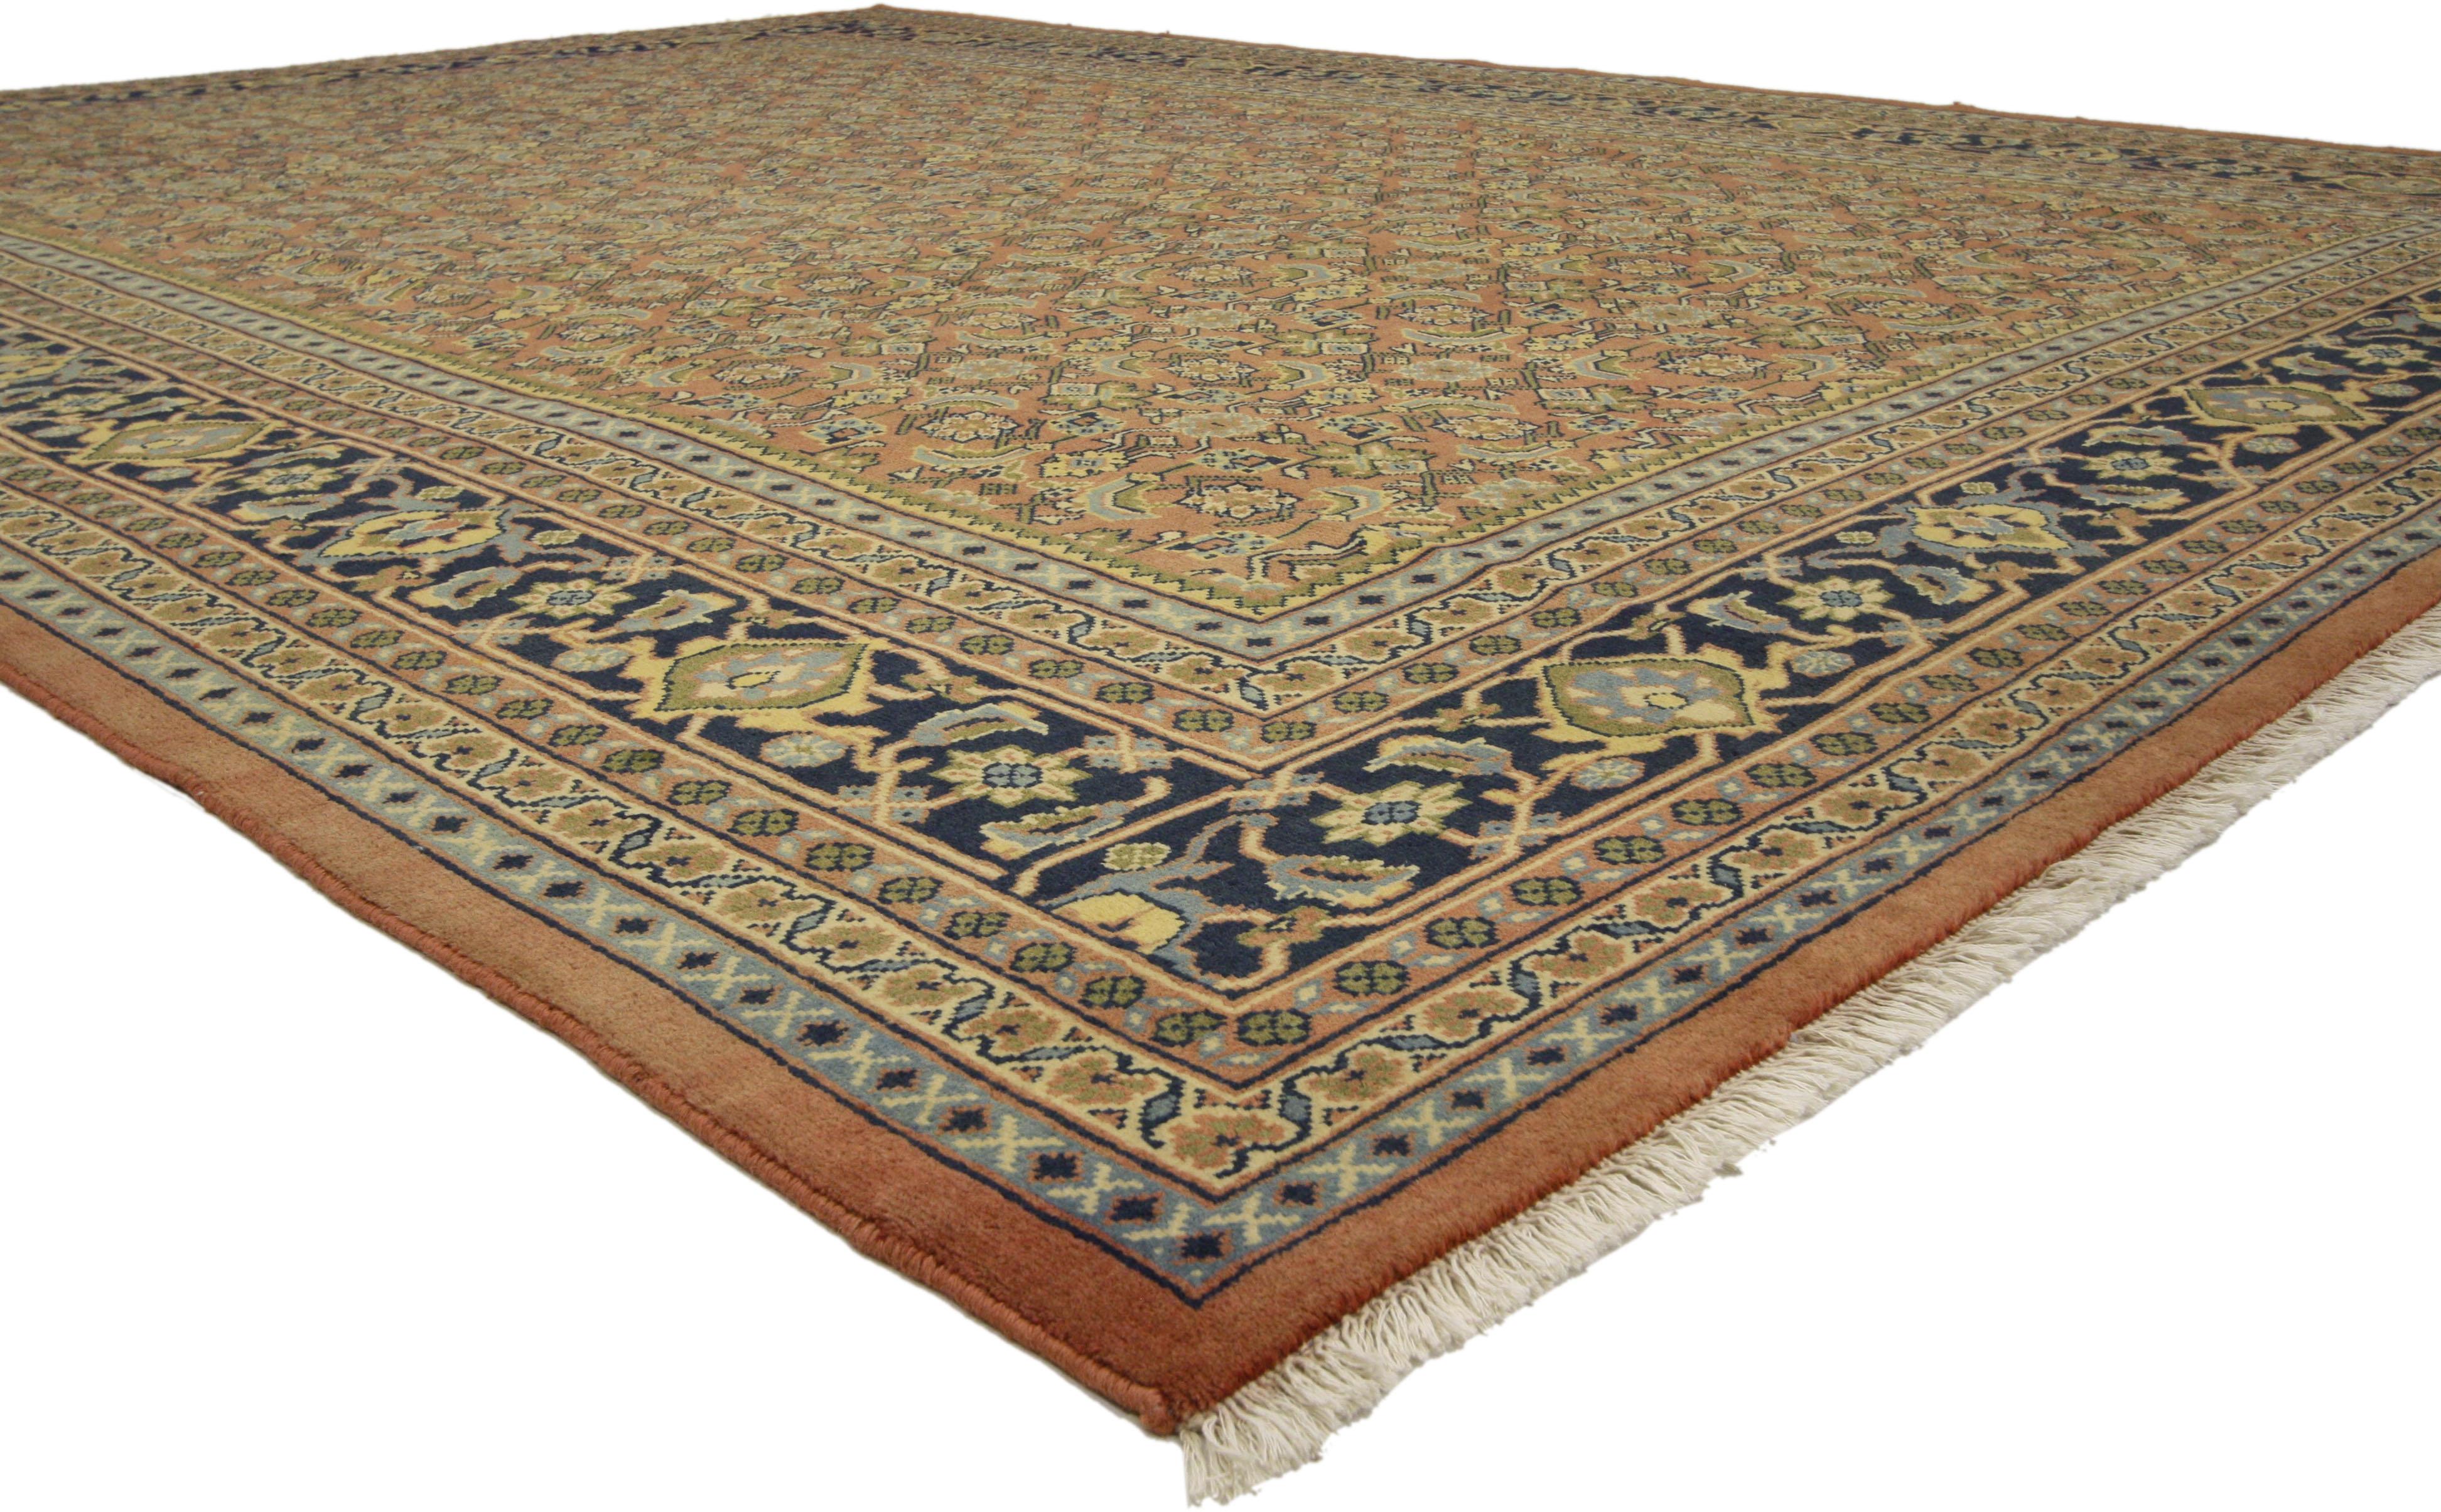 75844 Vintage Persian Mahal Area Rug with Arts & Crafts Style 09'09 X 13'00 From Esmaili Rugs Collection. This hand-knotted wool vintage Persian Mahal area rug features a classic all-over Herati pattern across an abrashed field. The Herati pattern,